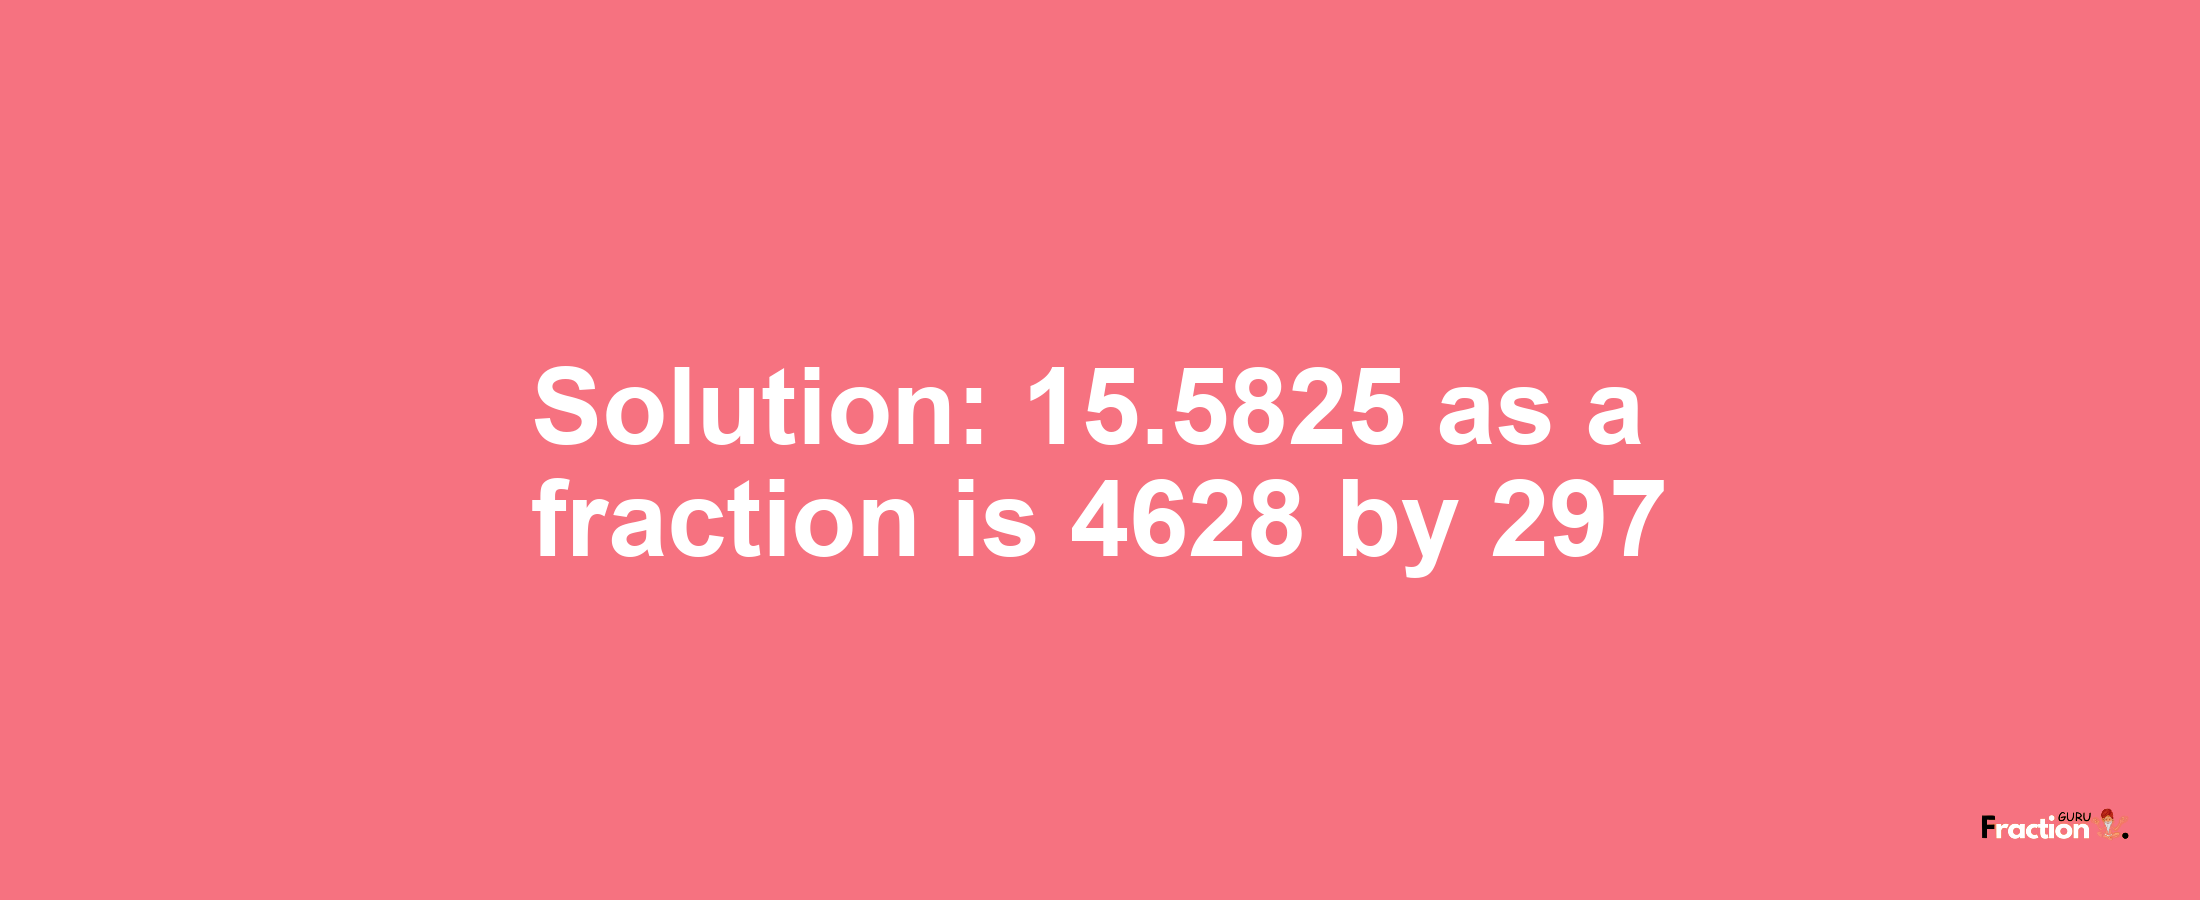 Solution:15.5825 as a fraction is 4628/297